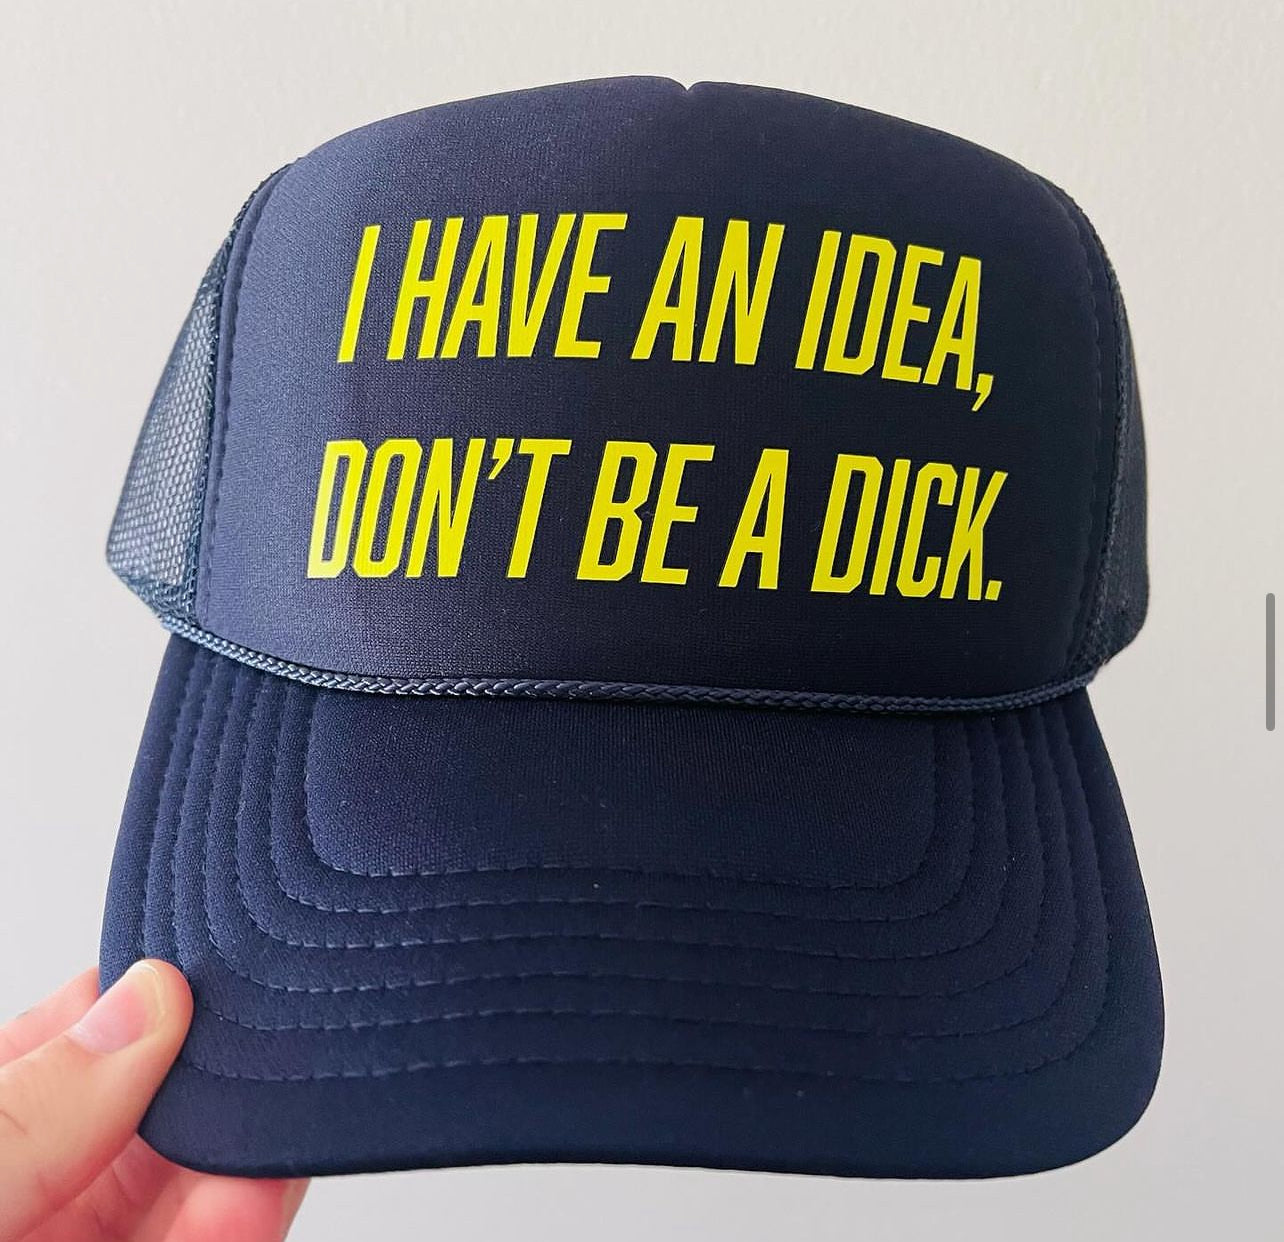 I have an idea,don’t be a dick.